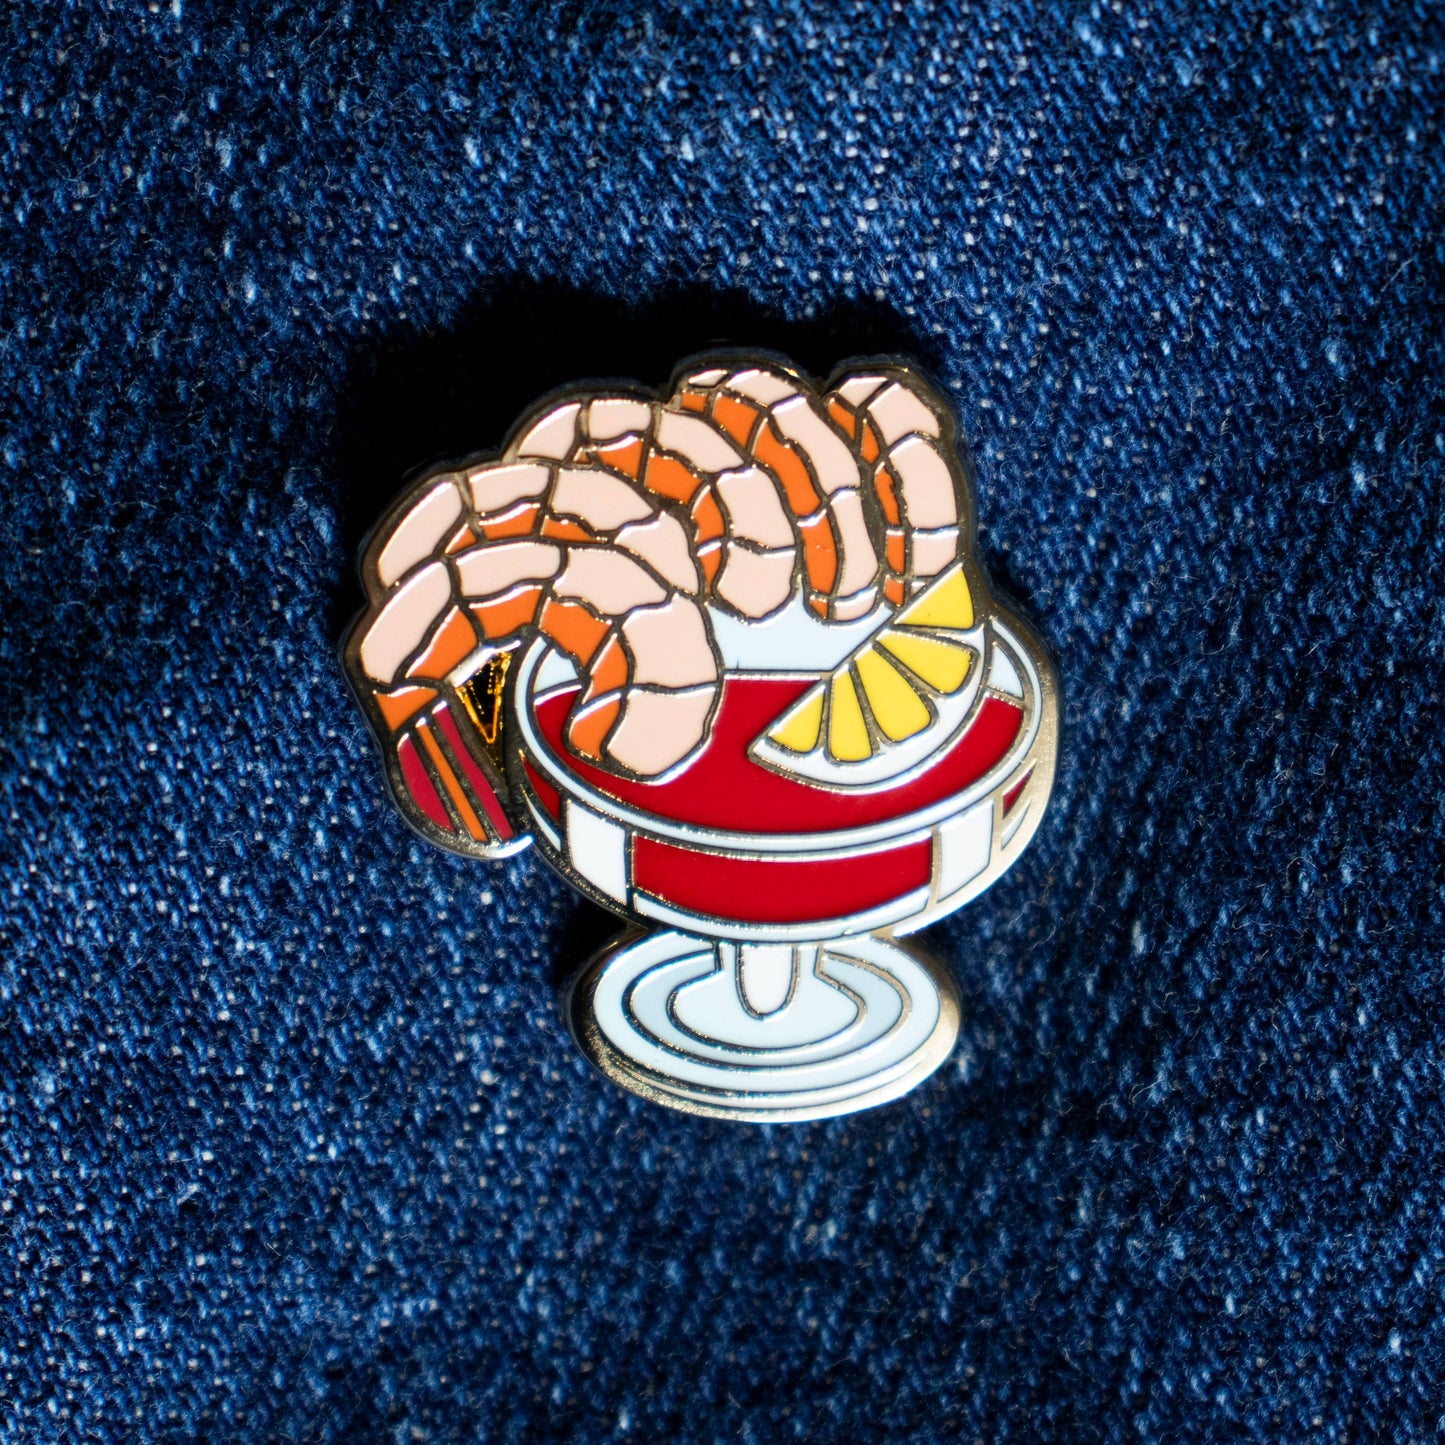 Shrimp cocktail lapel pin -- Five shrimp on a glass filled with cocktail sauce with a lemon wedge inside 